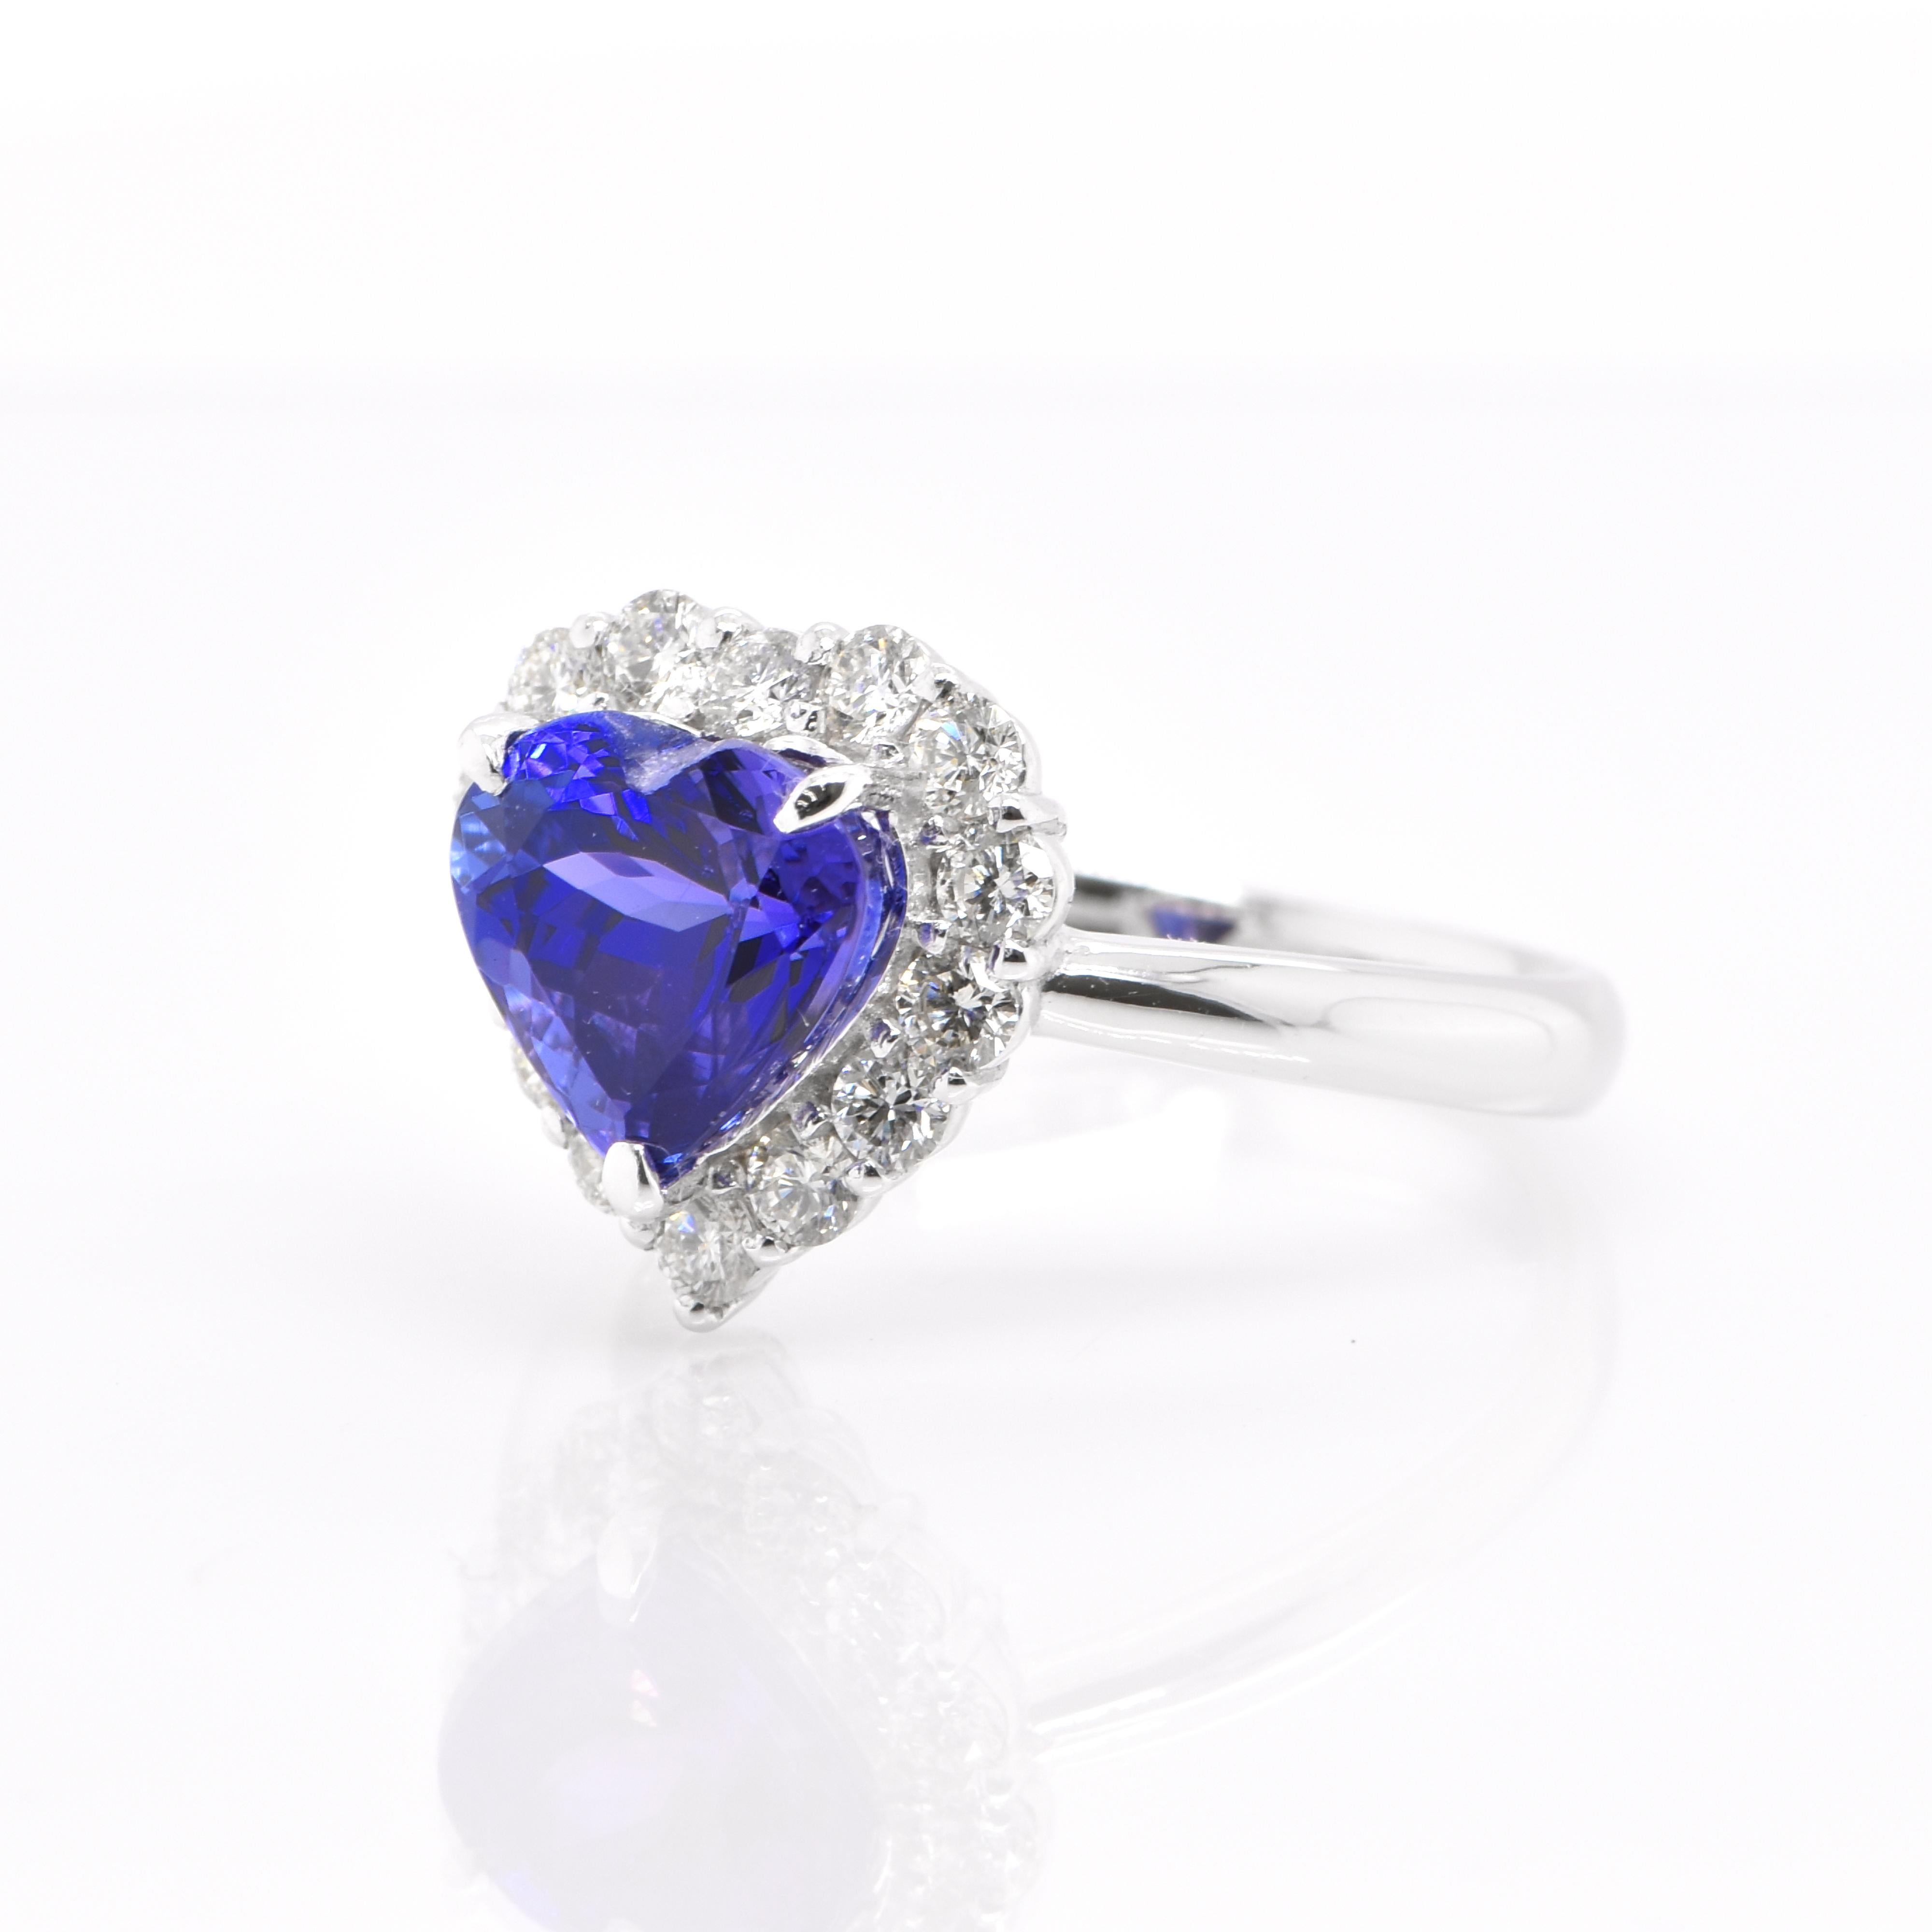 A beautiful Halo Ring inspired by the feature film Titanic, featuring a 2.68 Carat, Natural, Heart-Shape Tanzanite and 0.55 Carats of Diamond Accents set in Platinum. Tanzanite's name was given by Tiffany and Co after its only known source: